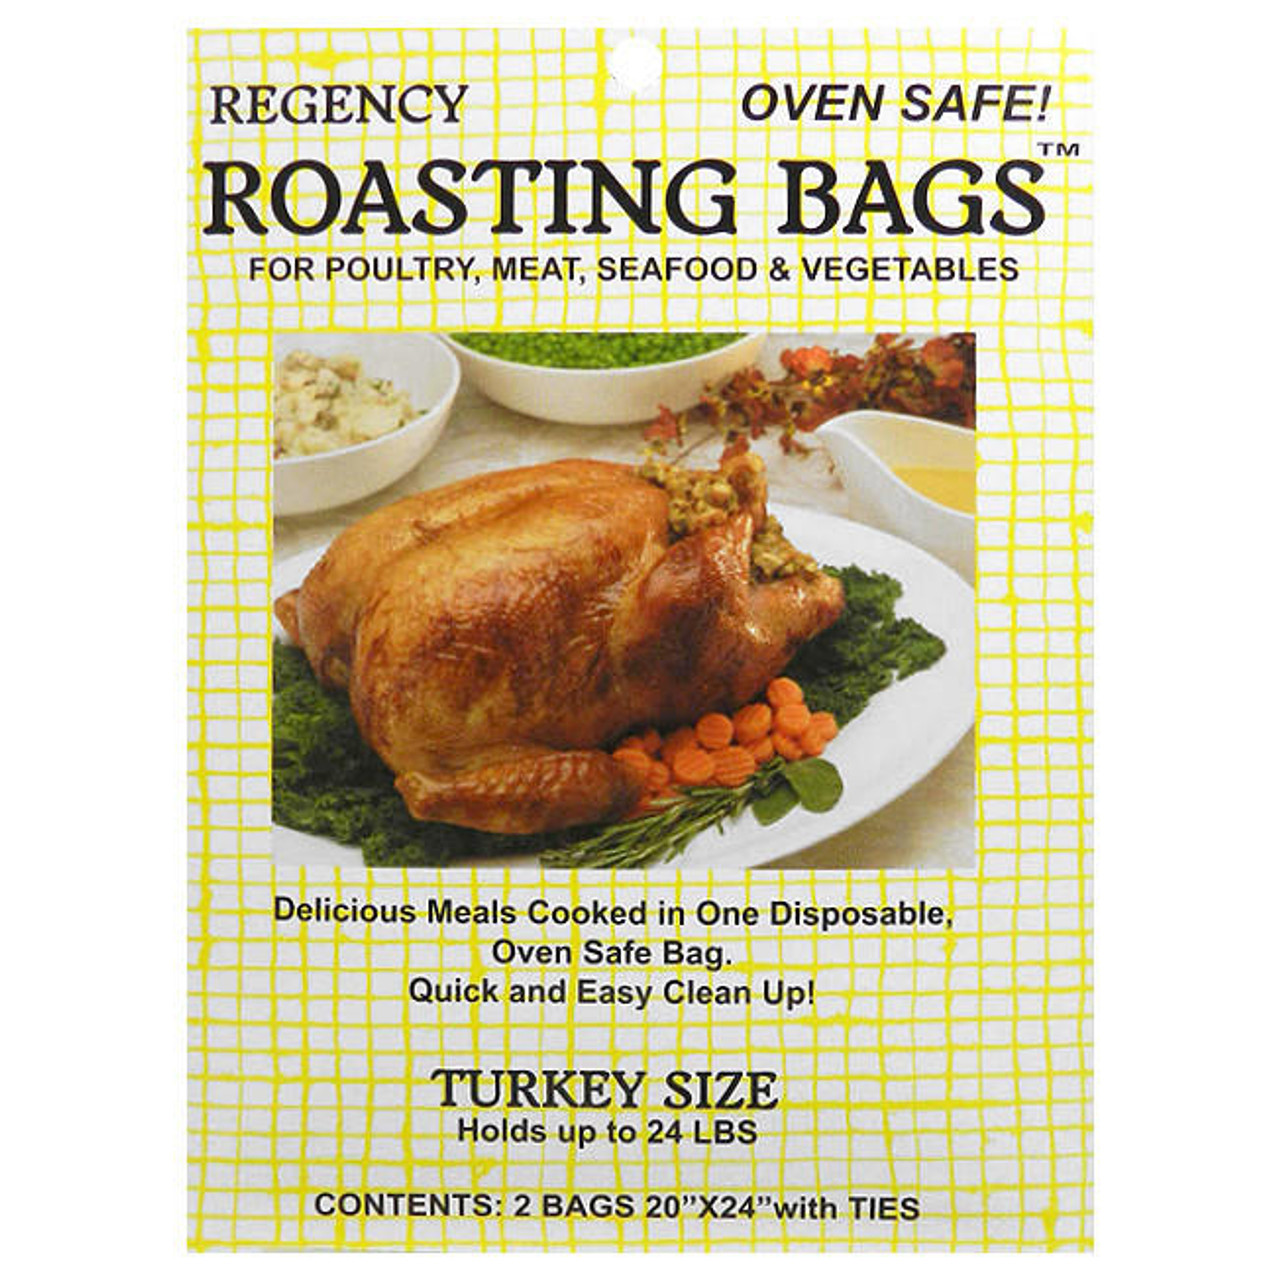 https://cdn11.bigcommerce.com/s-p82jn6co/images/stencil/1280x1280/products/6400/51003/17180-regency-roasting-bag-with-ties-20x24-in-pack-of-2__94884.1703365738.jpg?c=2